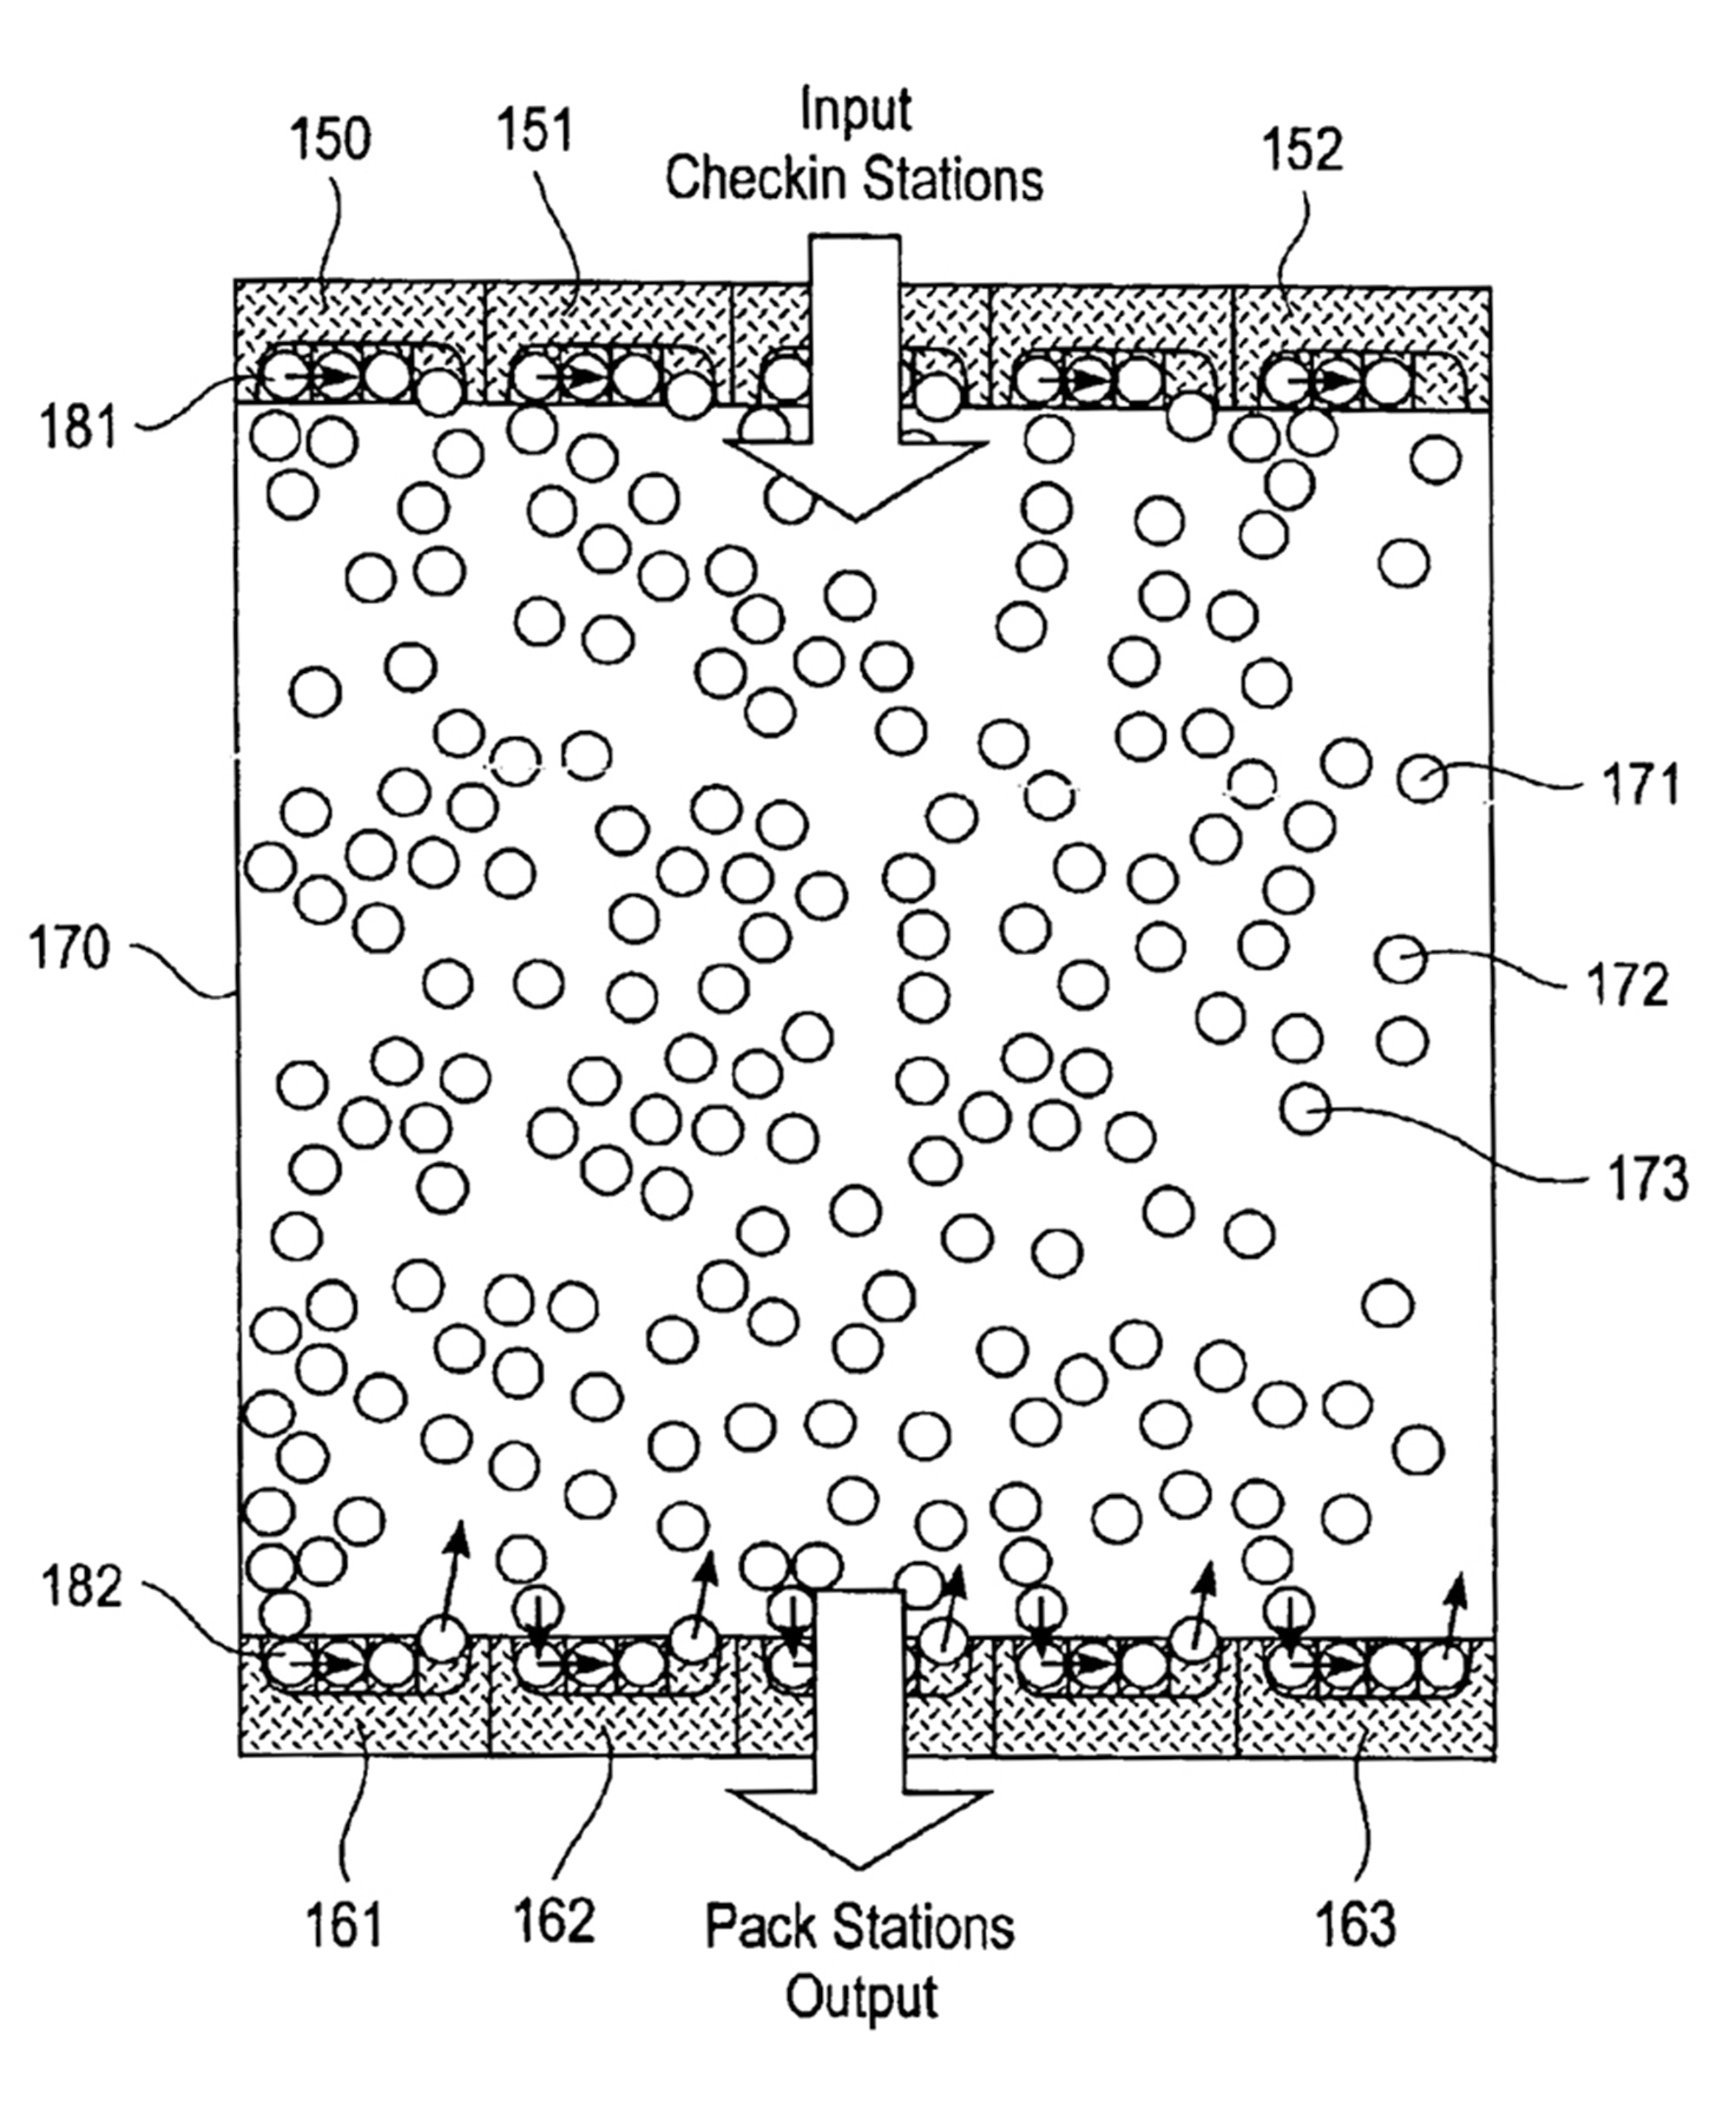 Illustration for a two thousand and five US patent. It depicts workflows between input check-in stations and output pack stations. The paths of Kiva’s mobile drive units are determined by coordinating software. Because the location of the inventory units is always changing, the drive units do not follow fixed paths. 